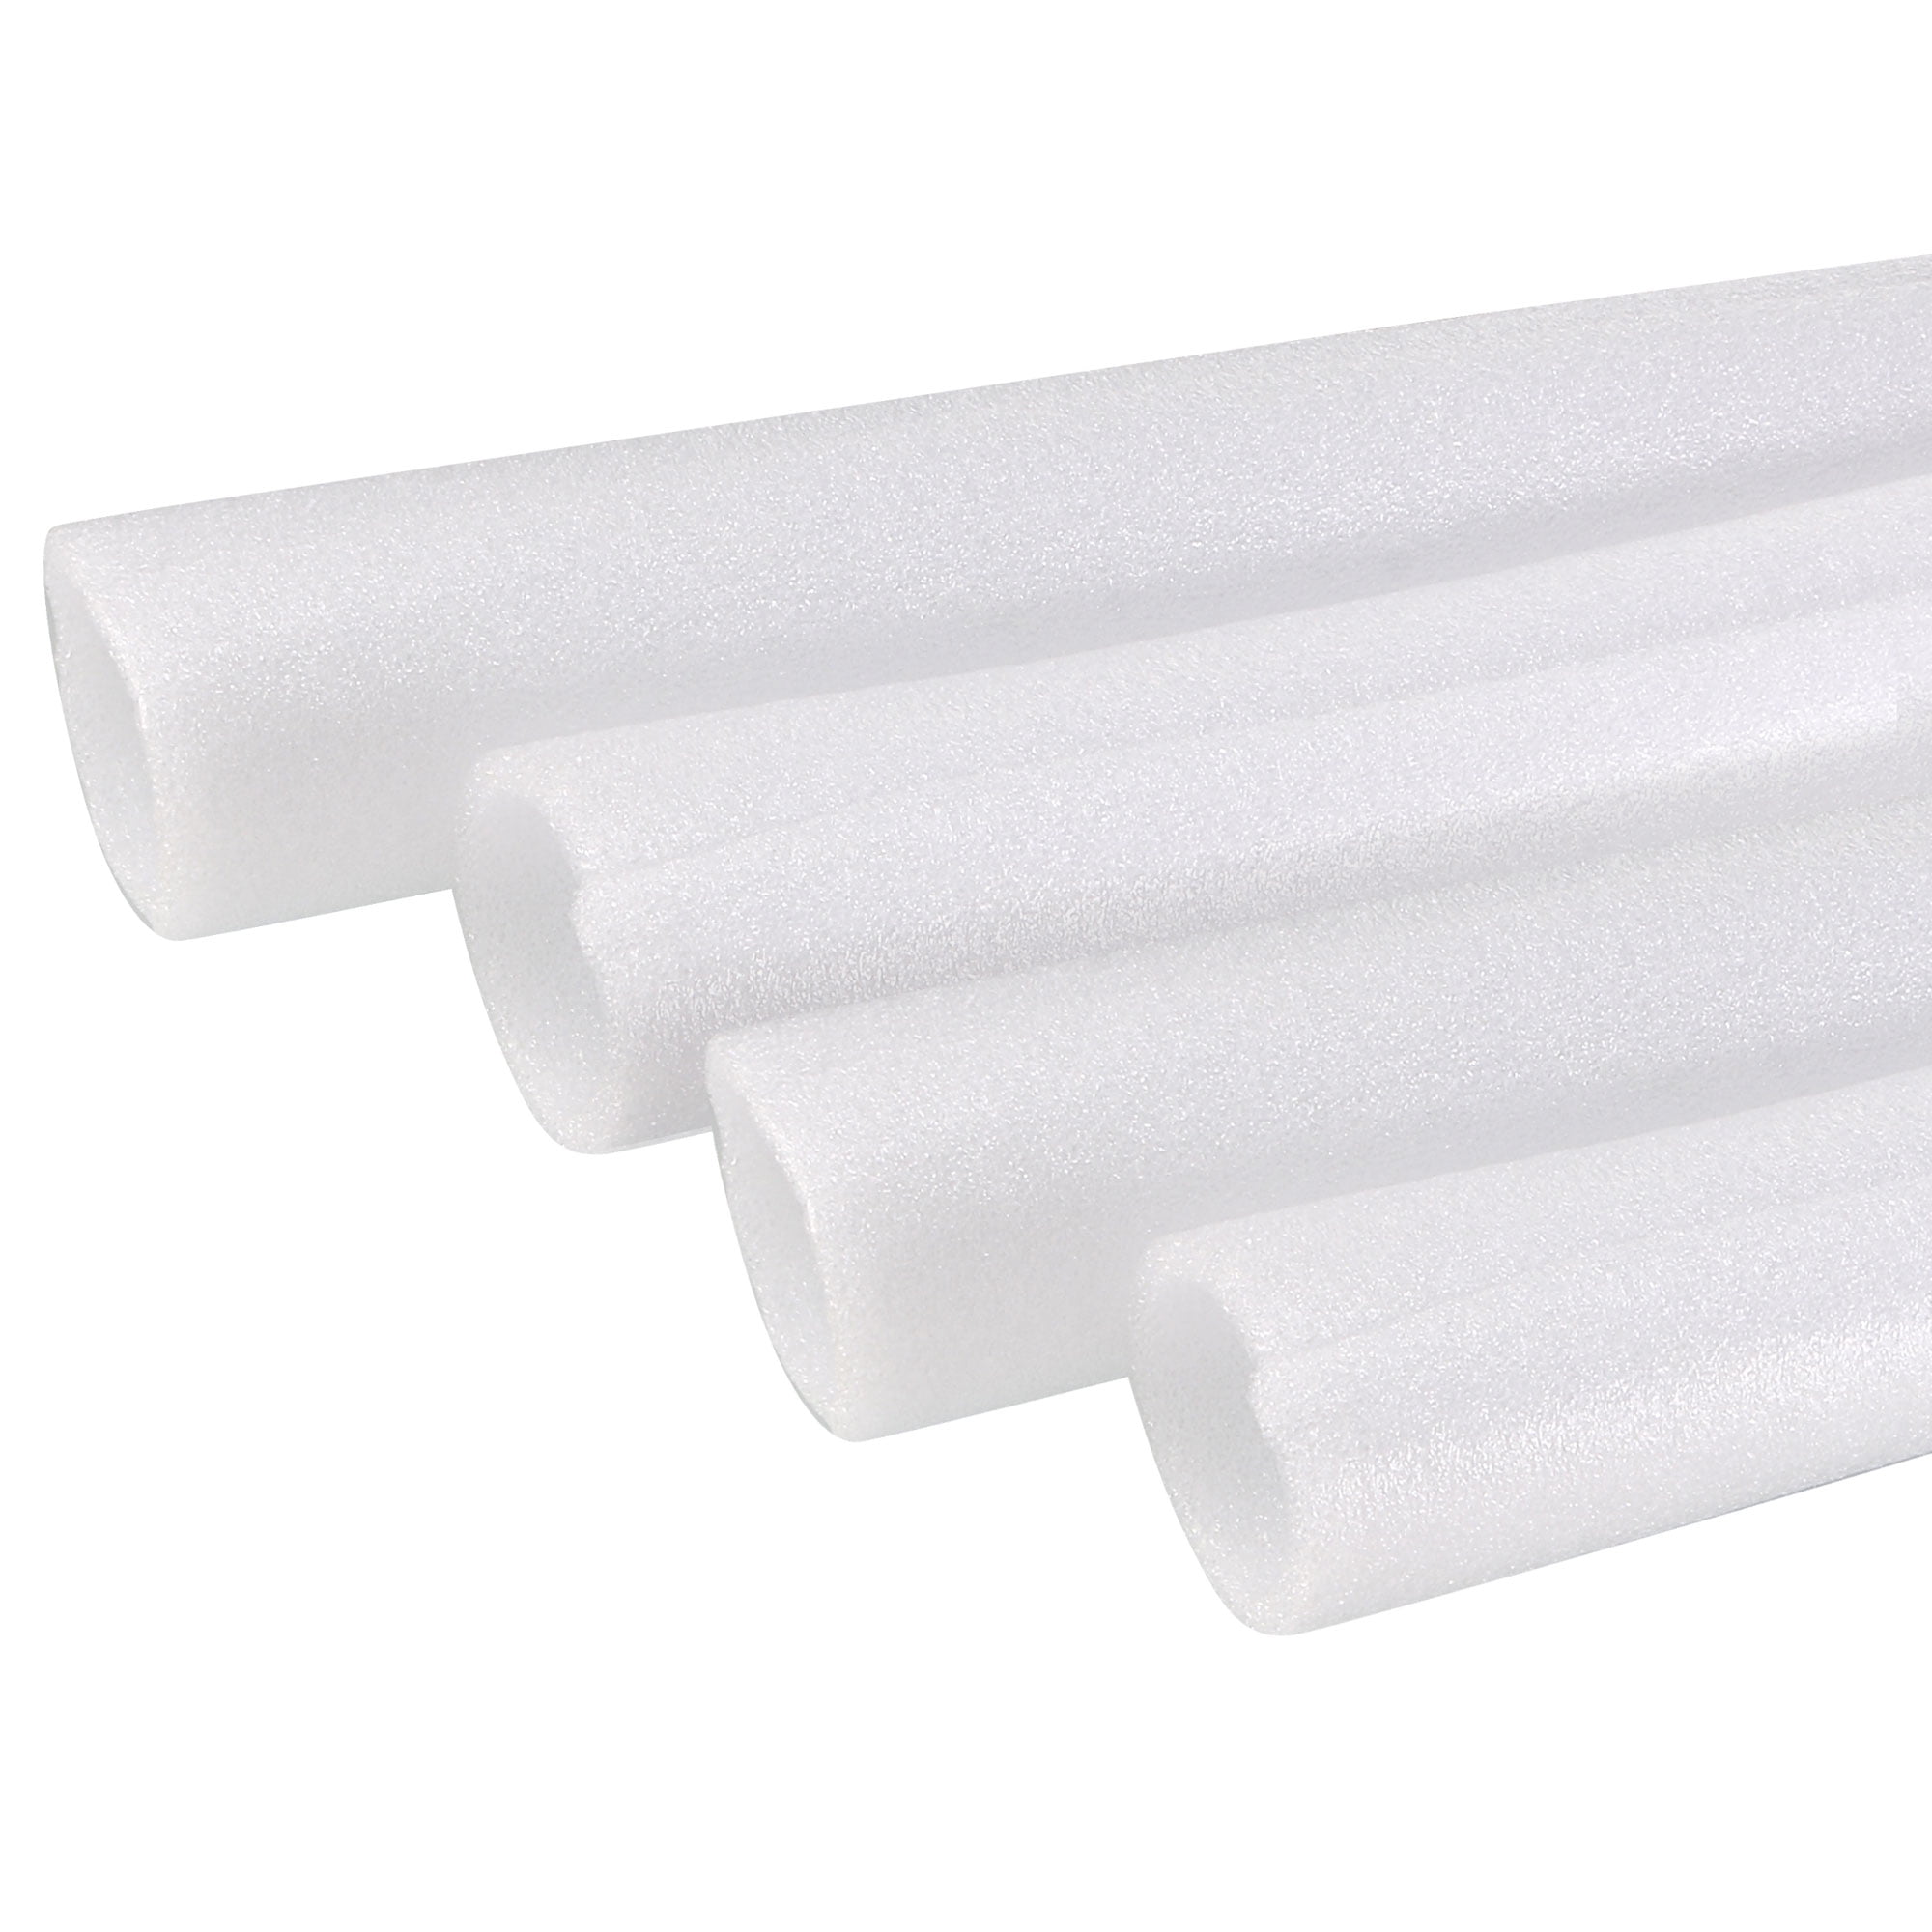 Uxcell Foam Tube Sponge Protective Sleeve 1000mm/3.28ft Length 28mm(1.1 inch) ID for Pipe Insulation, Pack of 2, Size: 28 mm x 38 mm, White